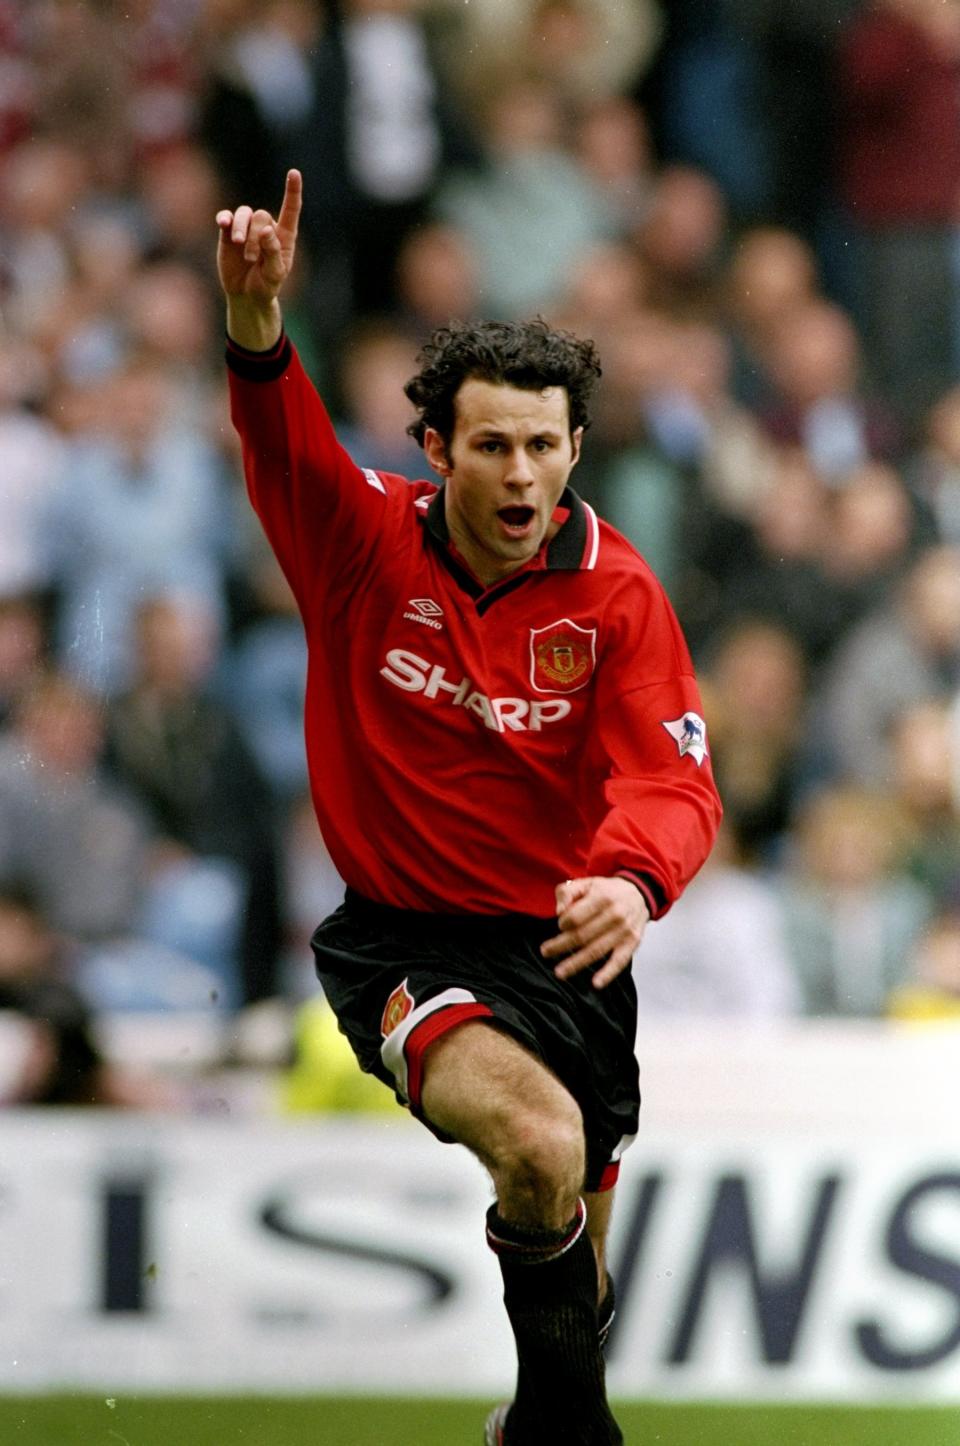 Ryan Giggs of Manchester United celebrates during an FA Carling Premiership match against Manchester City at Maine Road.